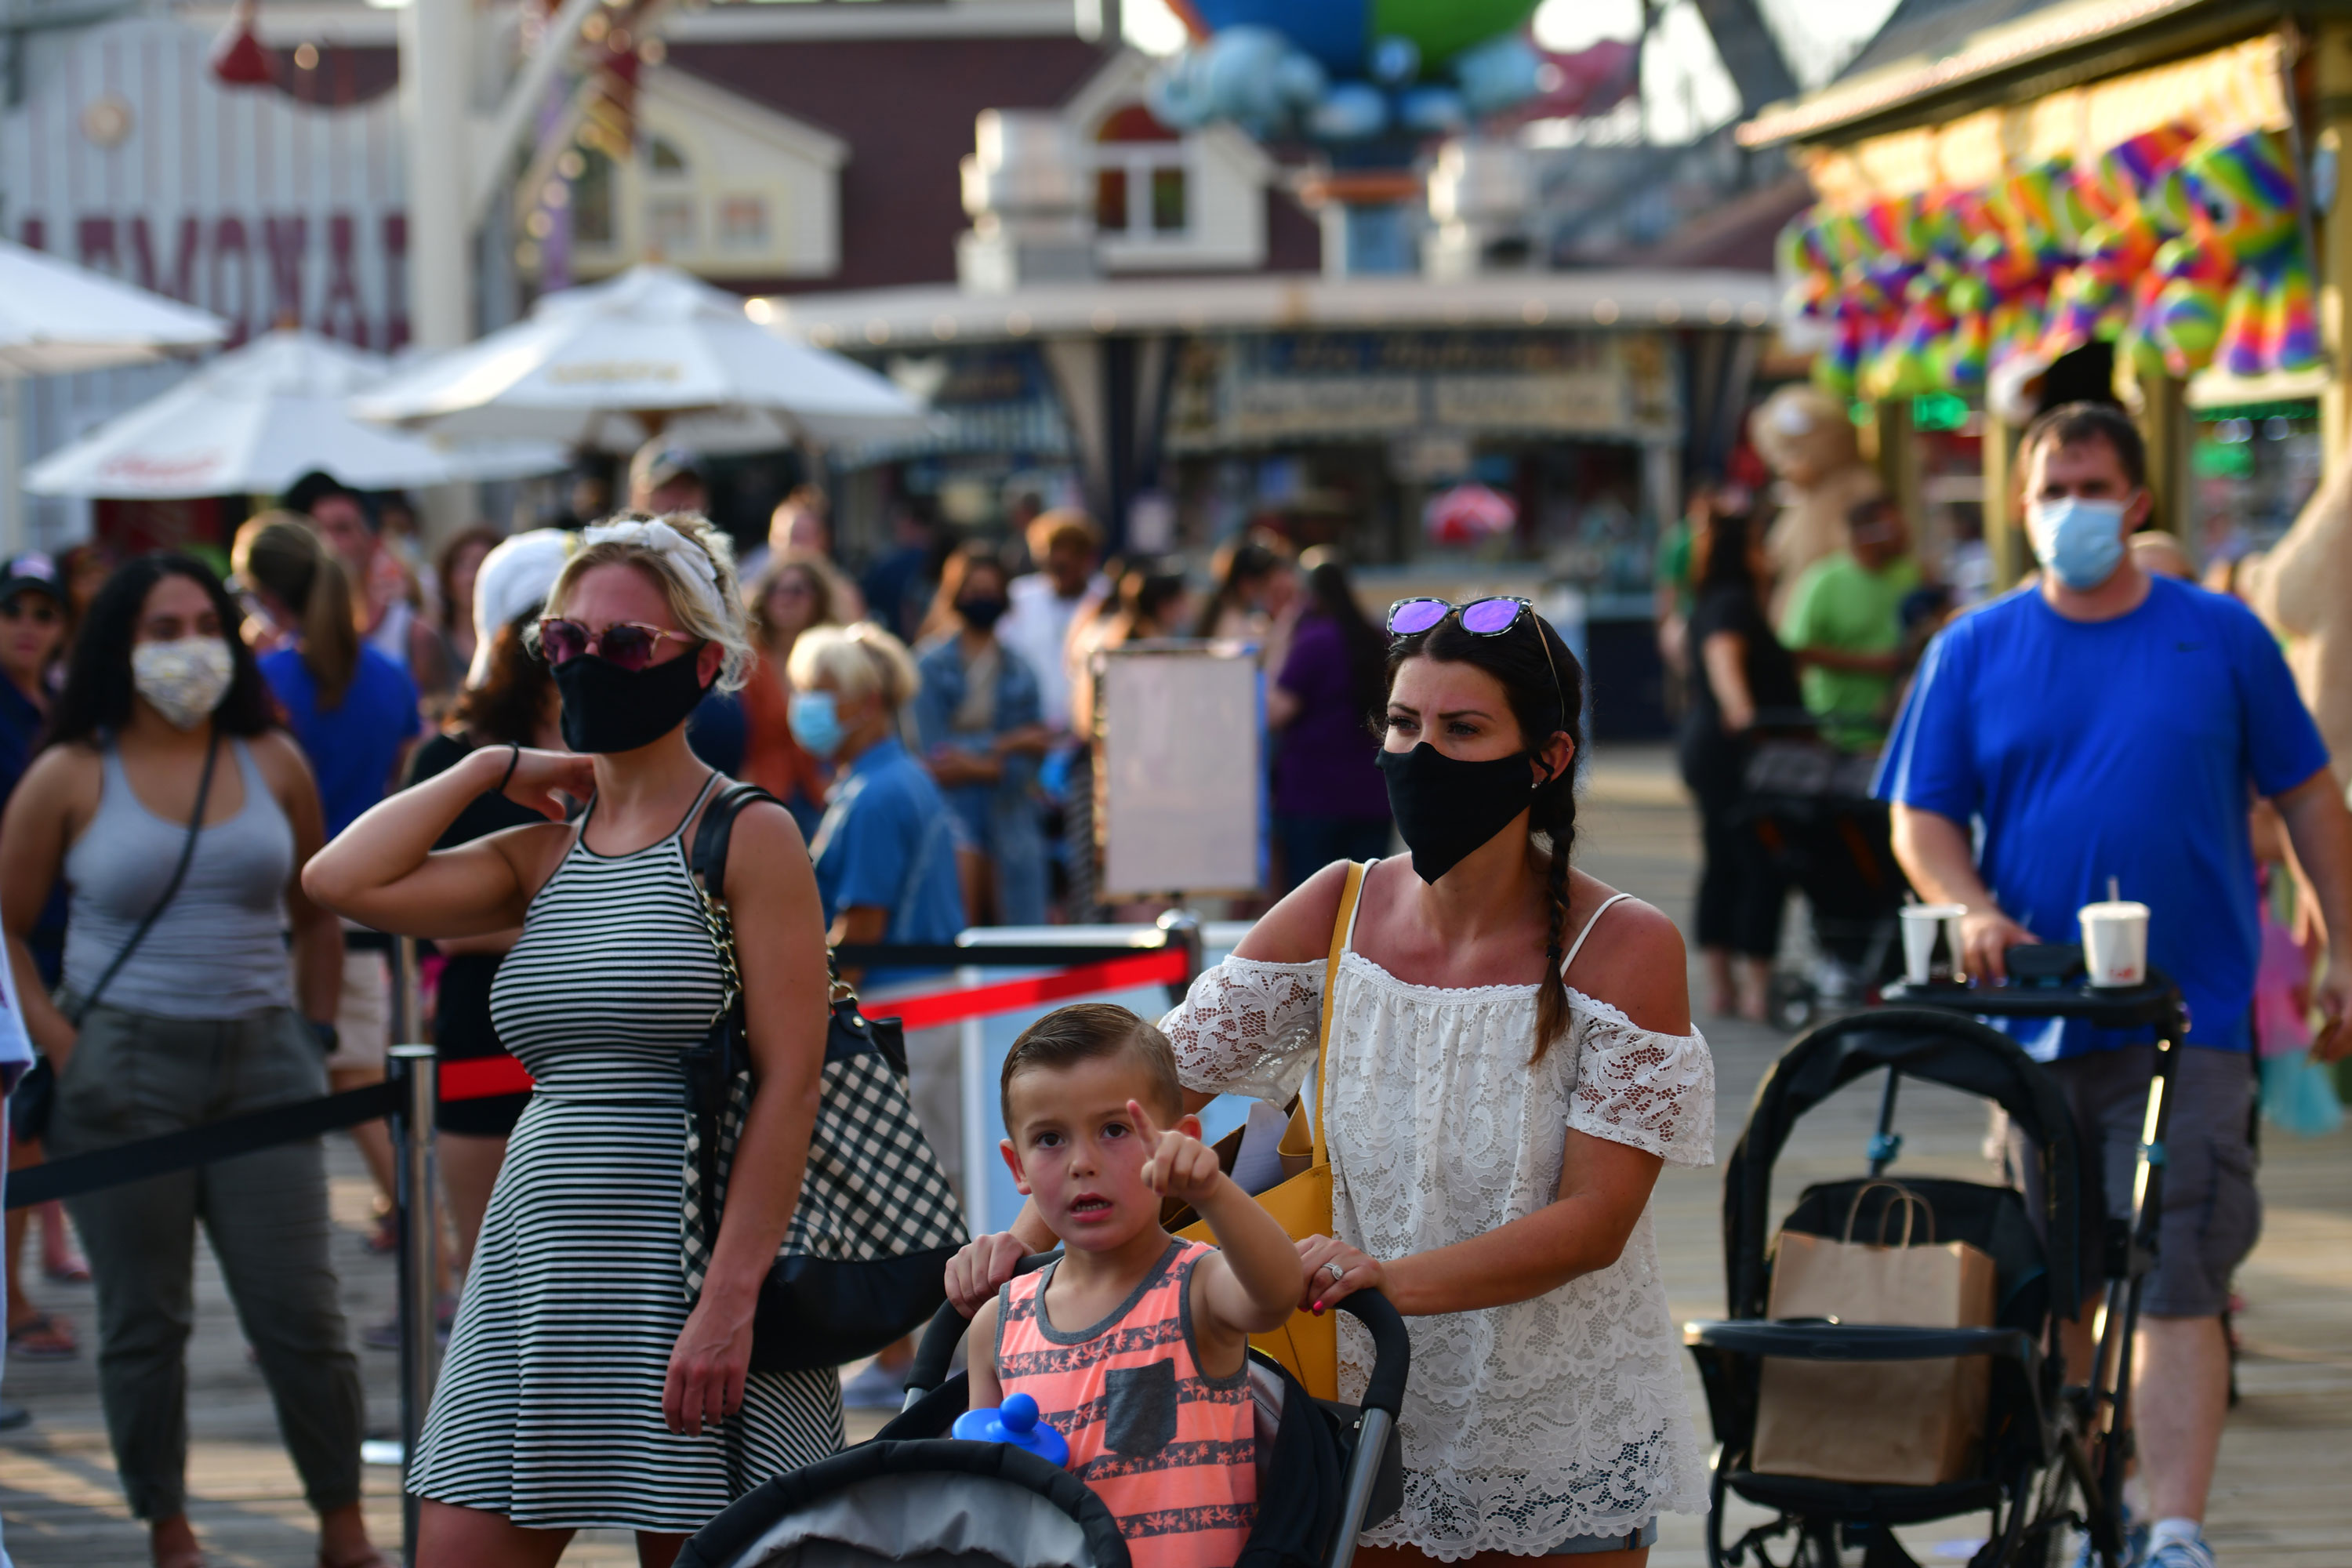 WILDWOOD, NJ - JULY 03: A family waits in line at the entrance to an amusement pier on July 3, 2020 in Wildwood, New Jersey. New Jersey beaches have reopened for the July 4th holiday as some coronavirus restrictions have been lifted, along with casinos, amusement rides and water parks at limited capacity. (Photo by Mark Makela/Getty Images)